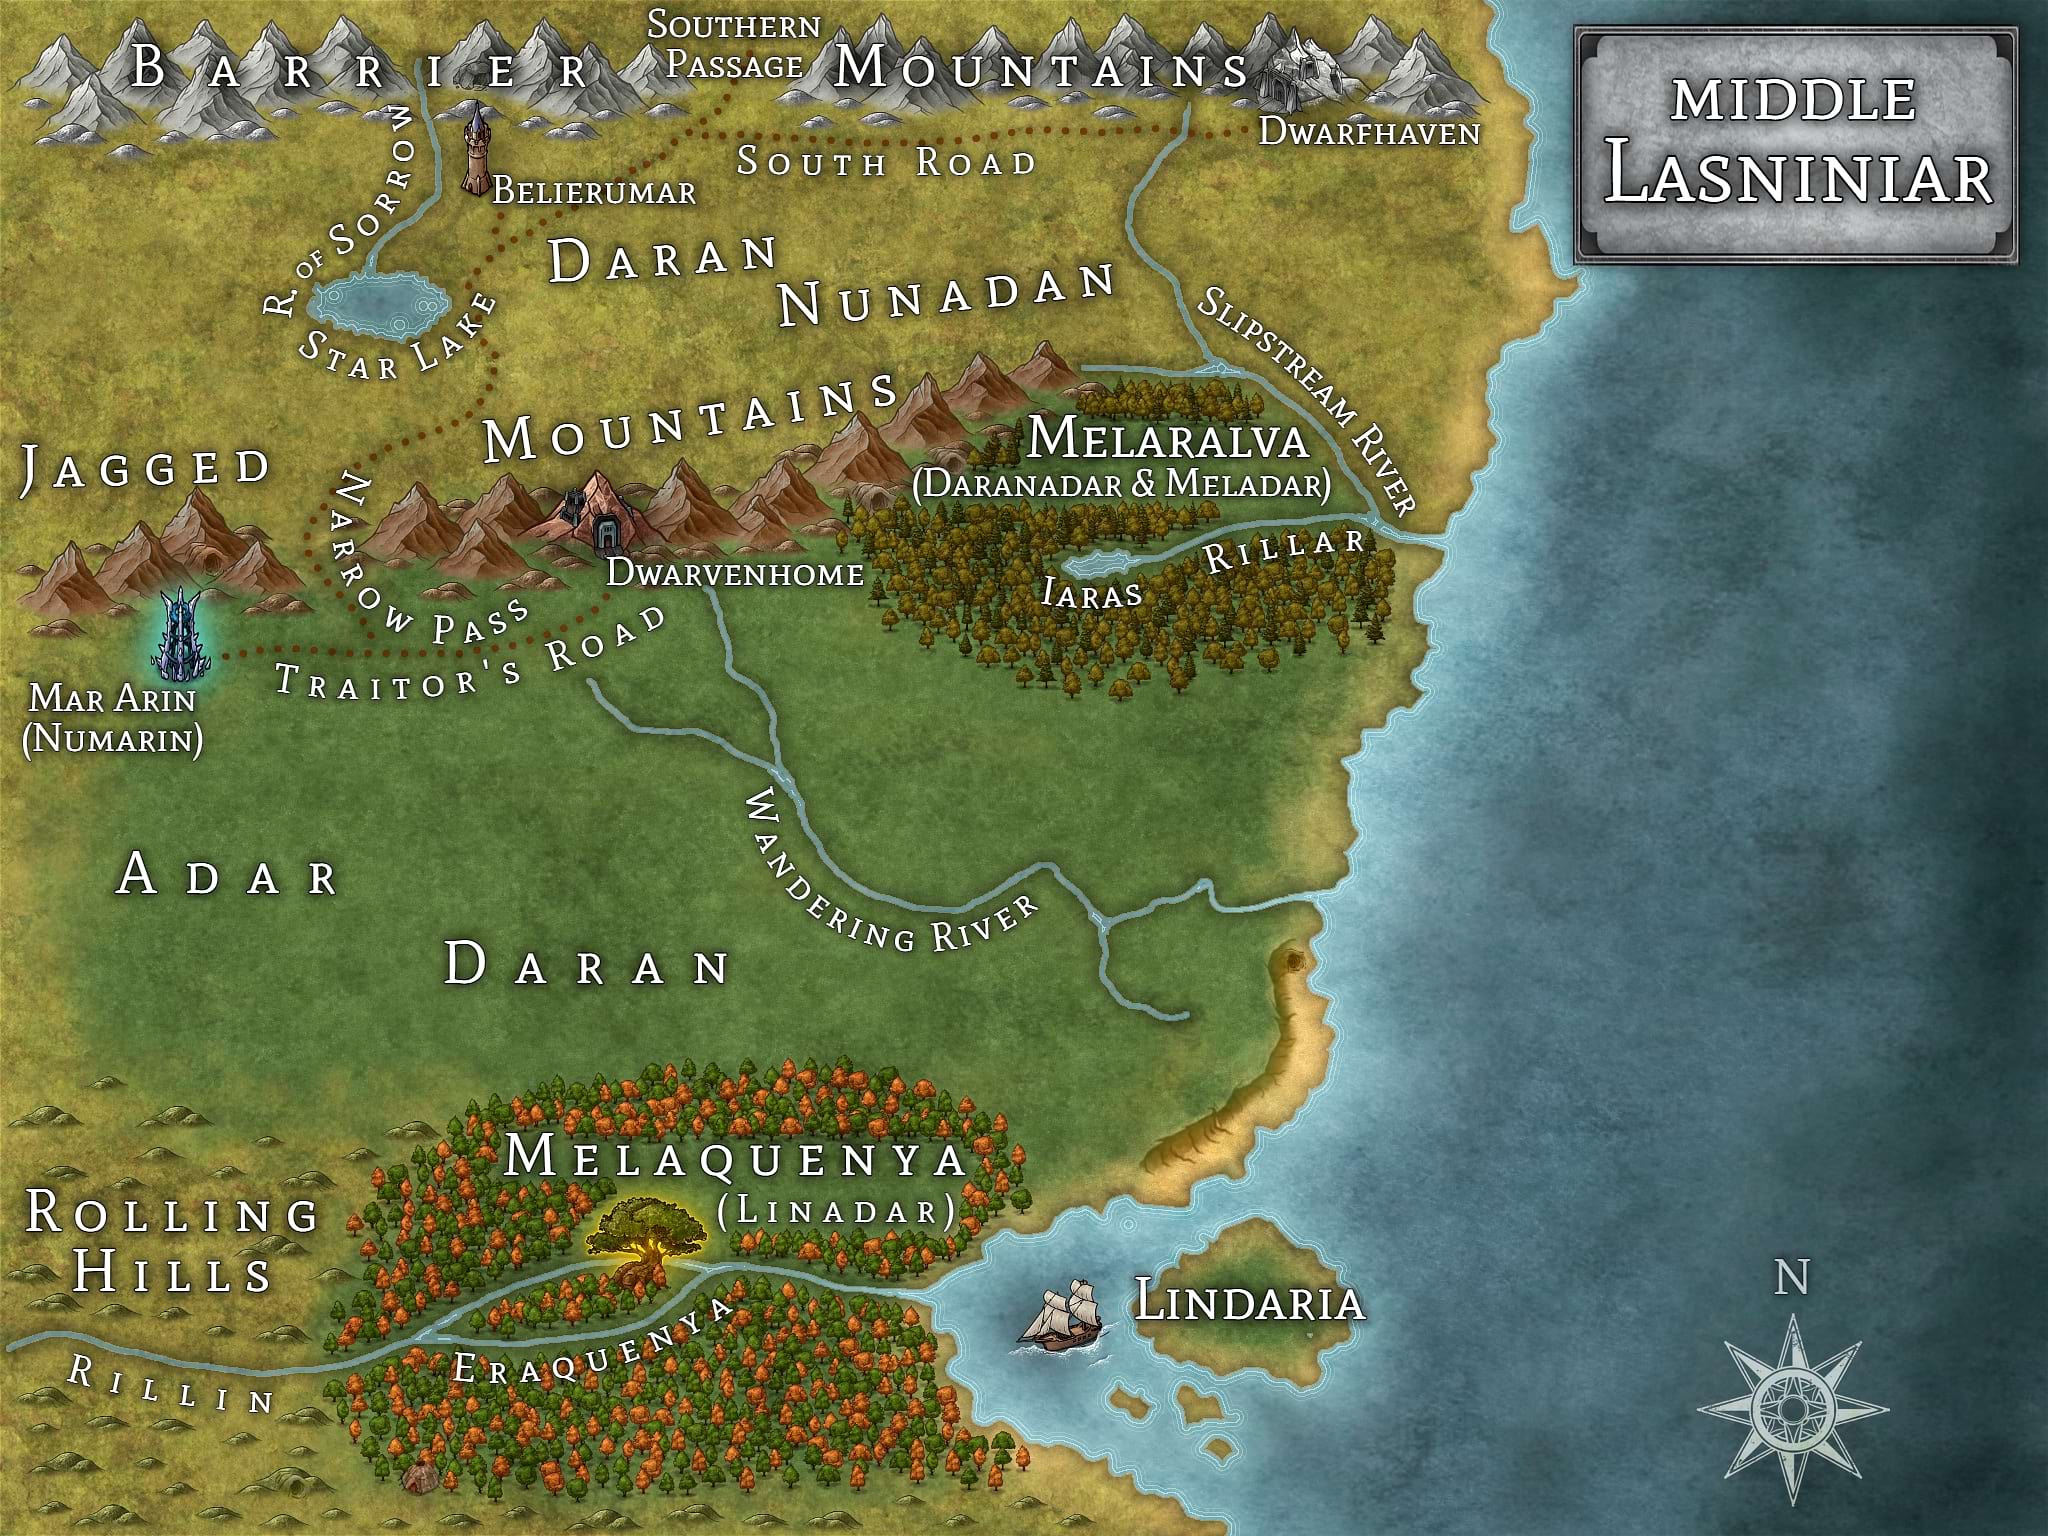 Map of Middle Lasniniar from the World of Lasniniar epic fantasy series